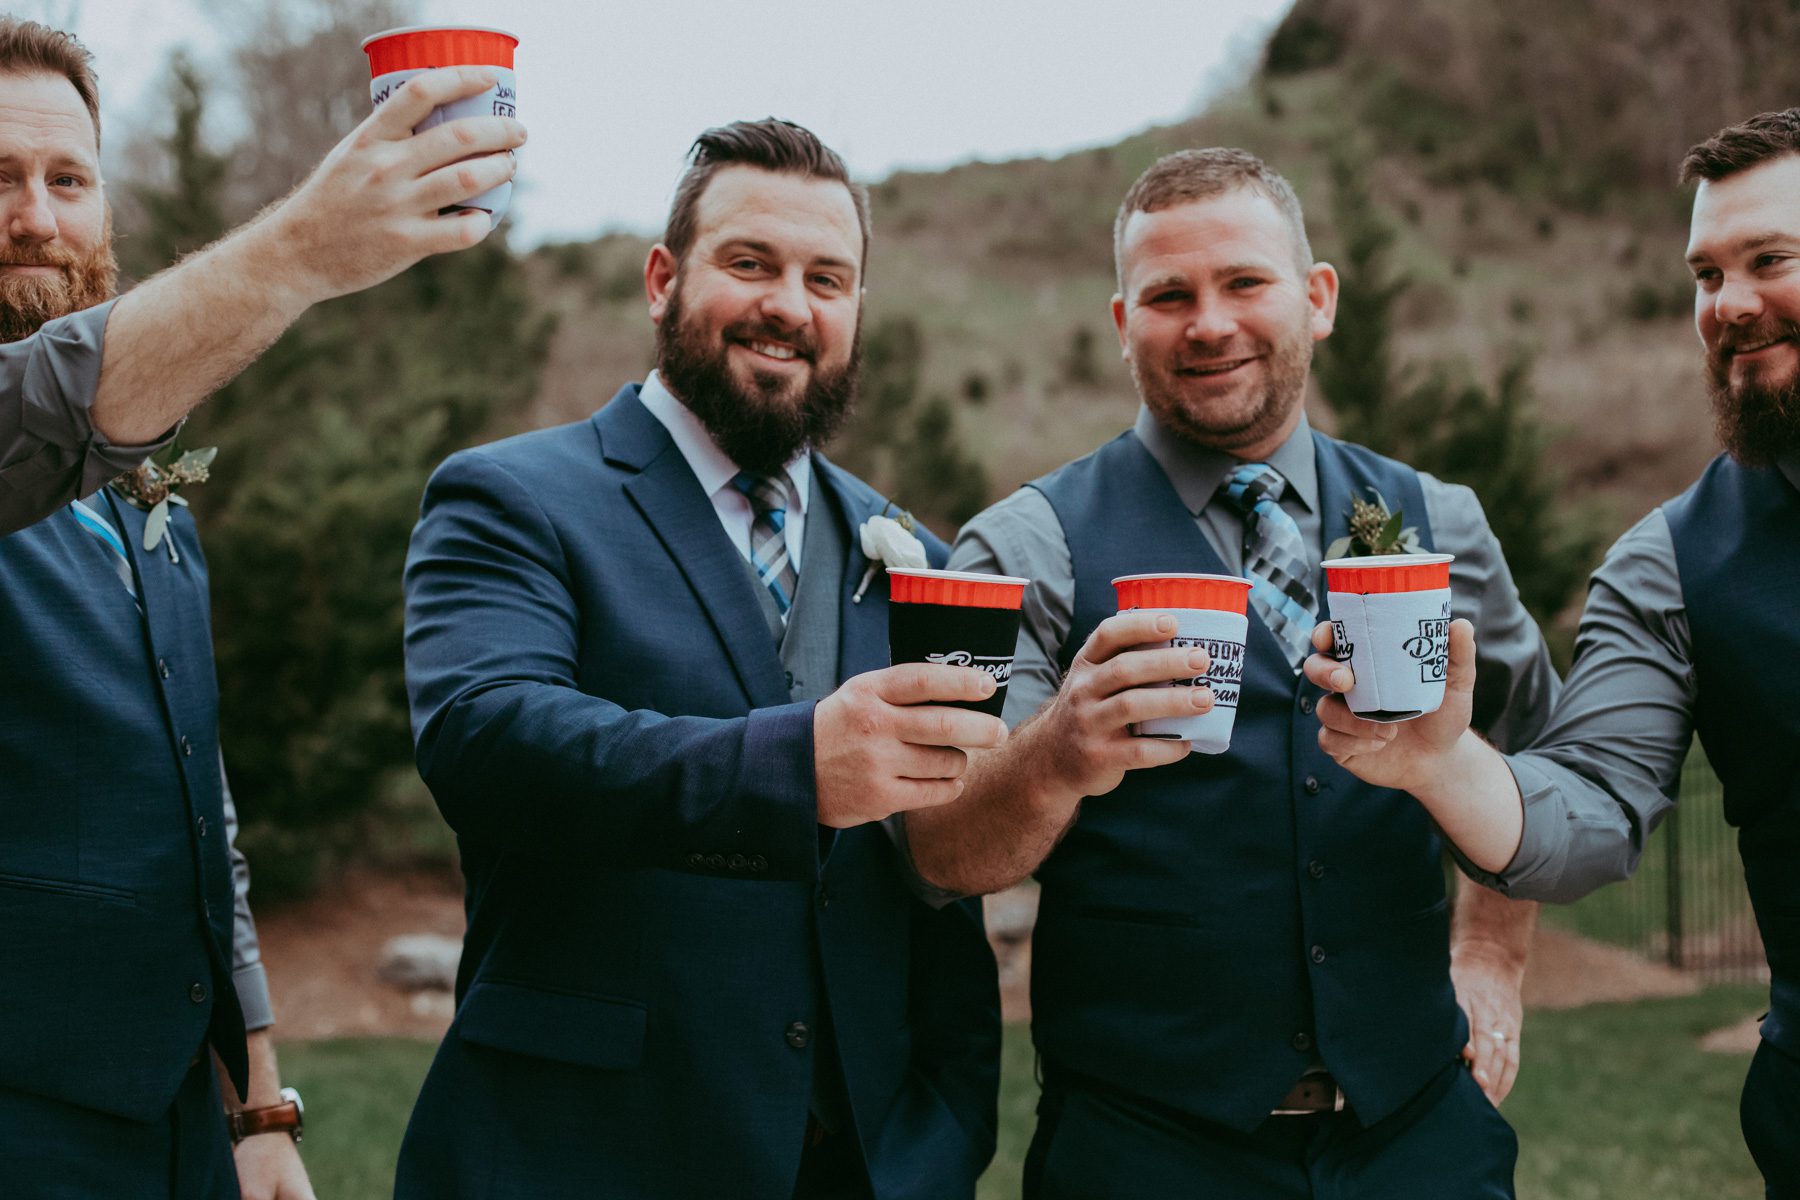 Groom hanging out with groomsmen 